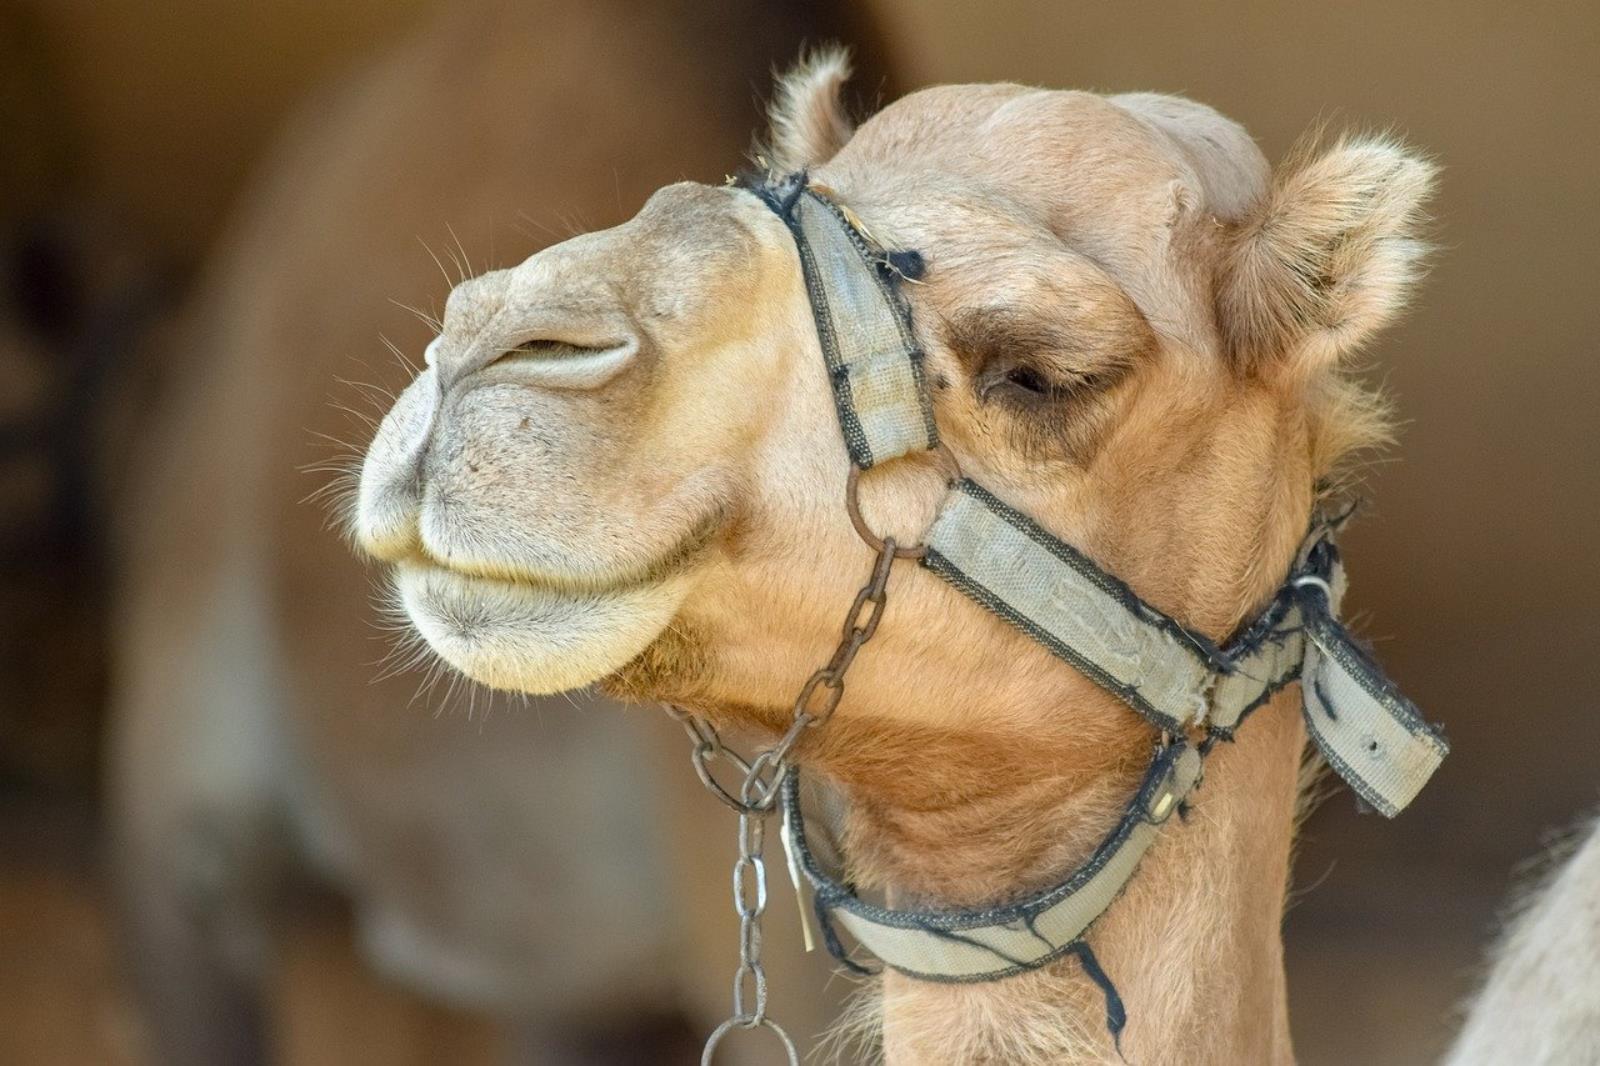 Scientists have developed high-precision humidity sensors based on camel's noses